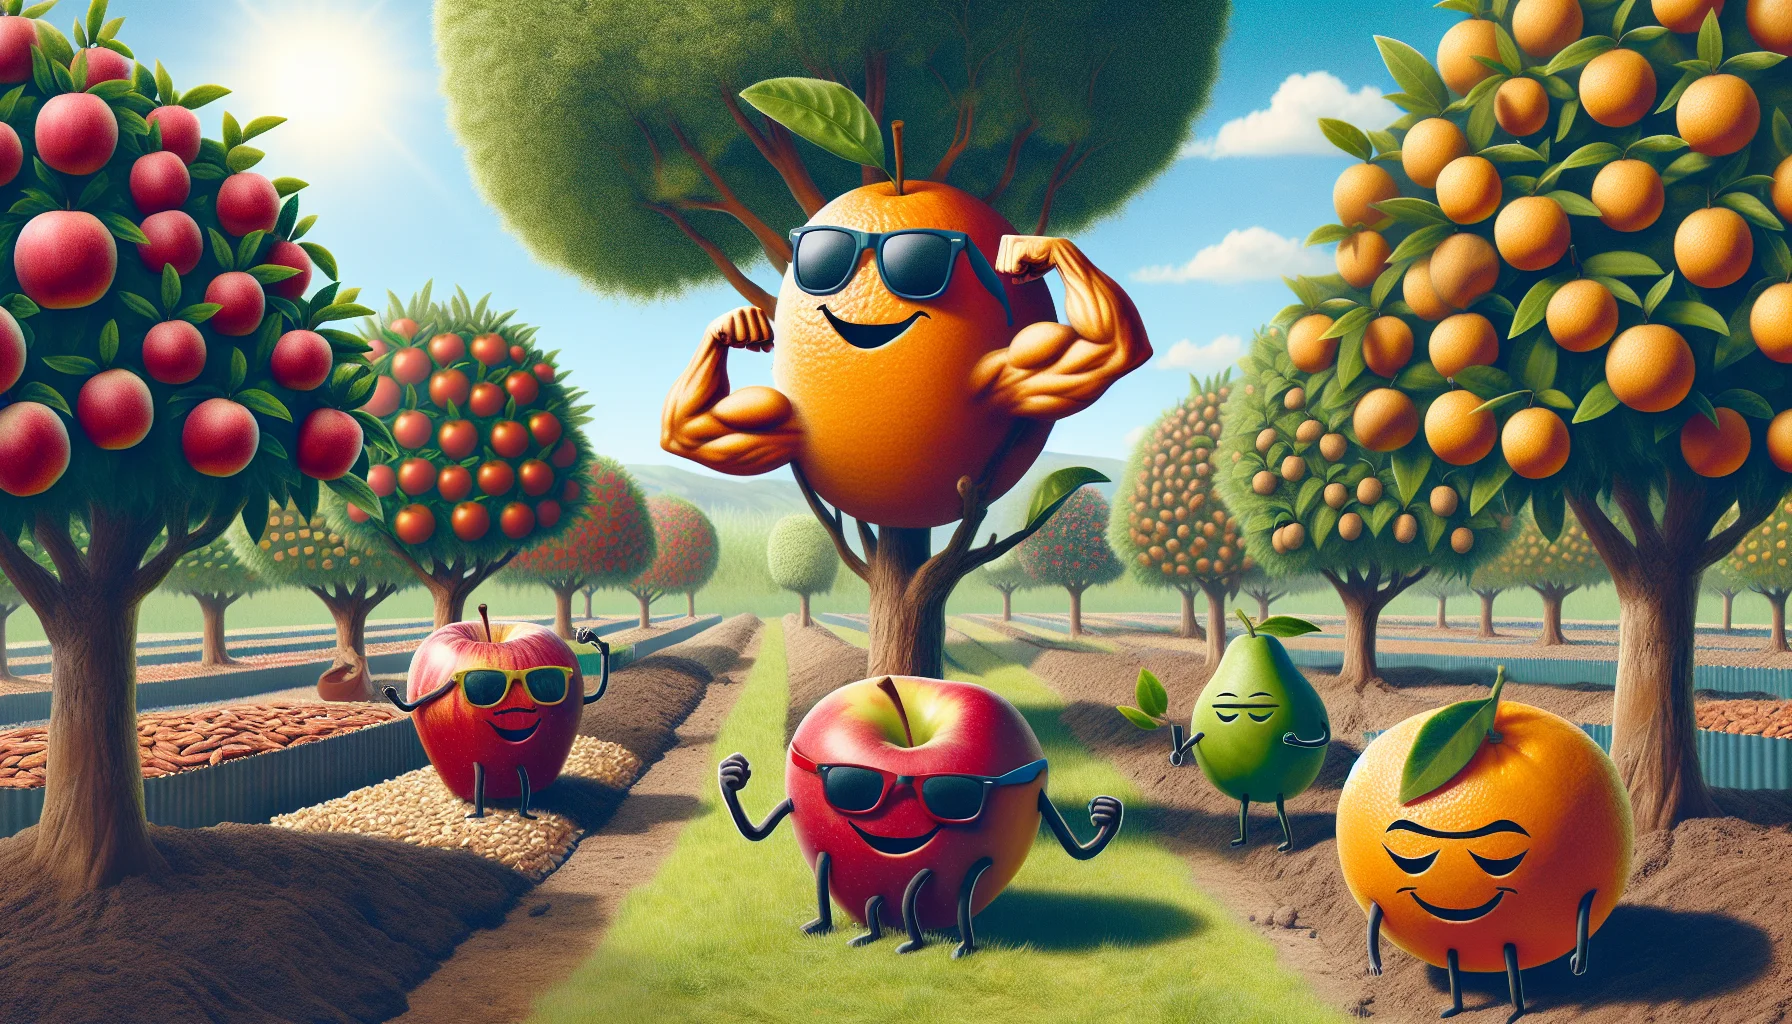 Imagine a realistic garden scene filled with various trees bearing fruits and nuts. The scene is imbued with a touch of humor. One tree has huge apples that seem to be flexing their muscles, symbolizing their healthy attributes. A tree with oranges is wearing sunglasses because it's so cool being a vitamin C source. The almond tree shows miniature almonds doing a fun dance. All this under a perfectly clear, sunny sky. The scene should spark an enjoyable vibe encouraging the viewers to participate in gardening, appreciating the delightful aspects of nature’s growth.